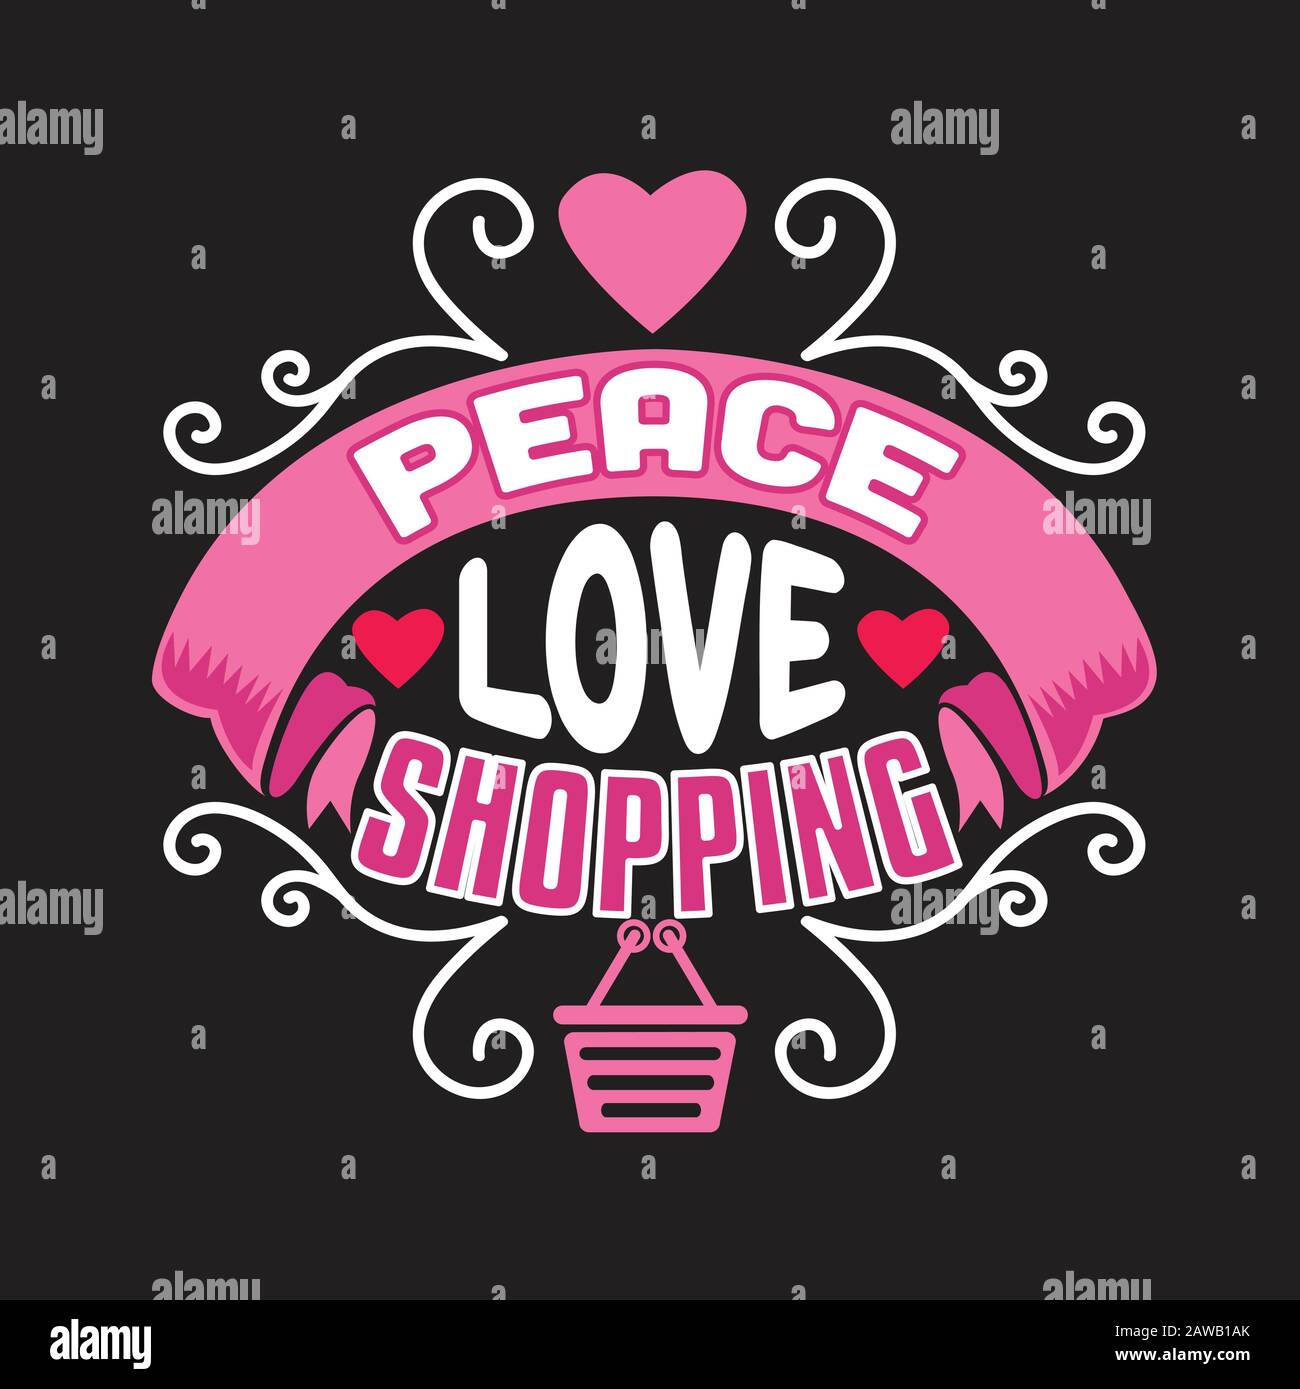 Shopping Quotes and Slogan good for Tee. Peace Love Shopping. Stock Vector